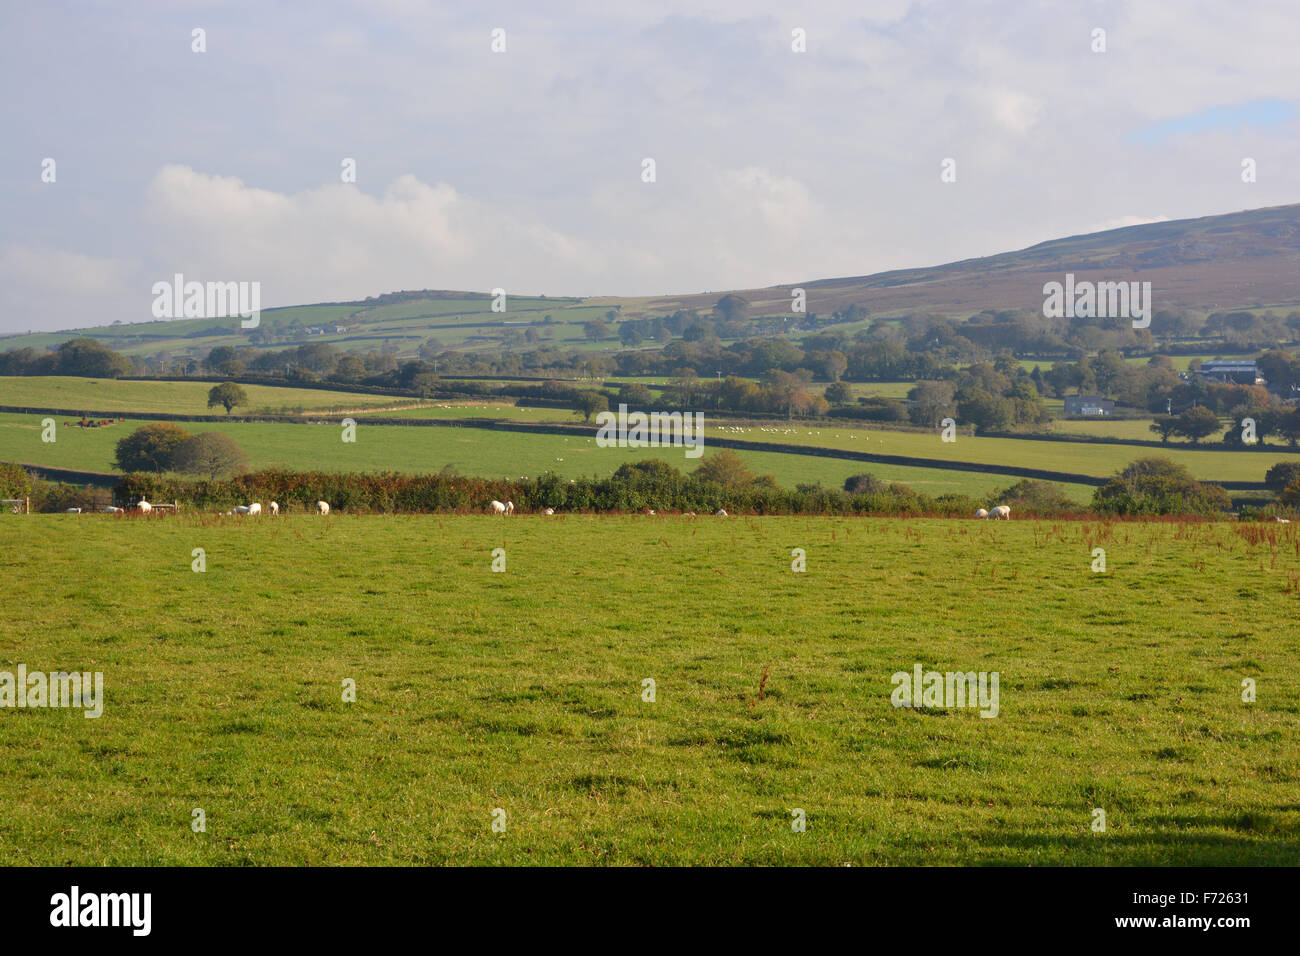 View over field with sheep looking towards Dartmoor National Park, Devon, England Stock Photo